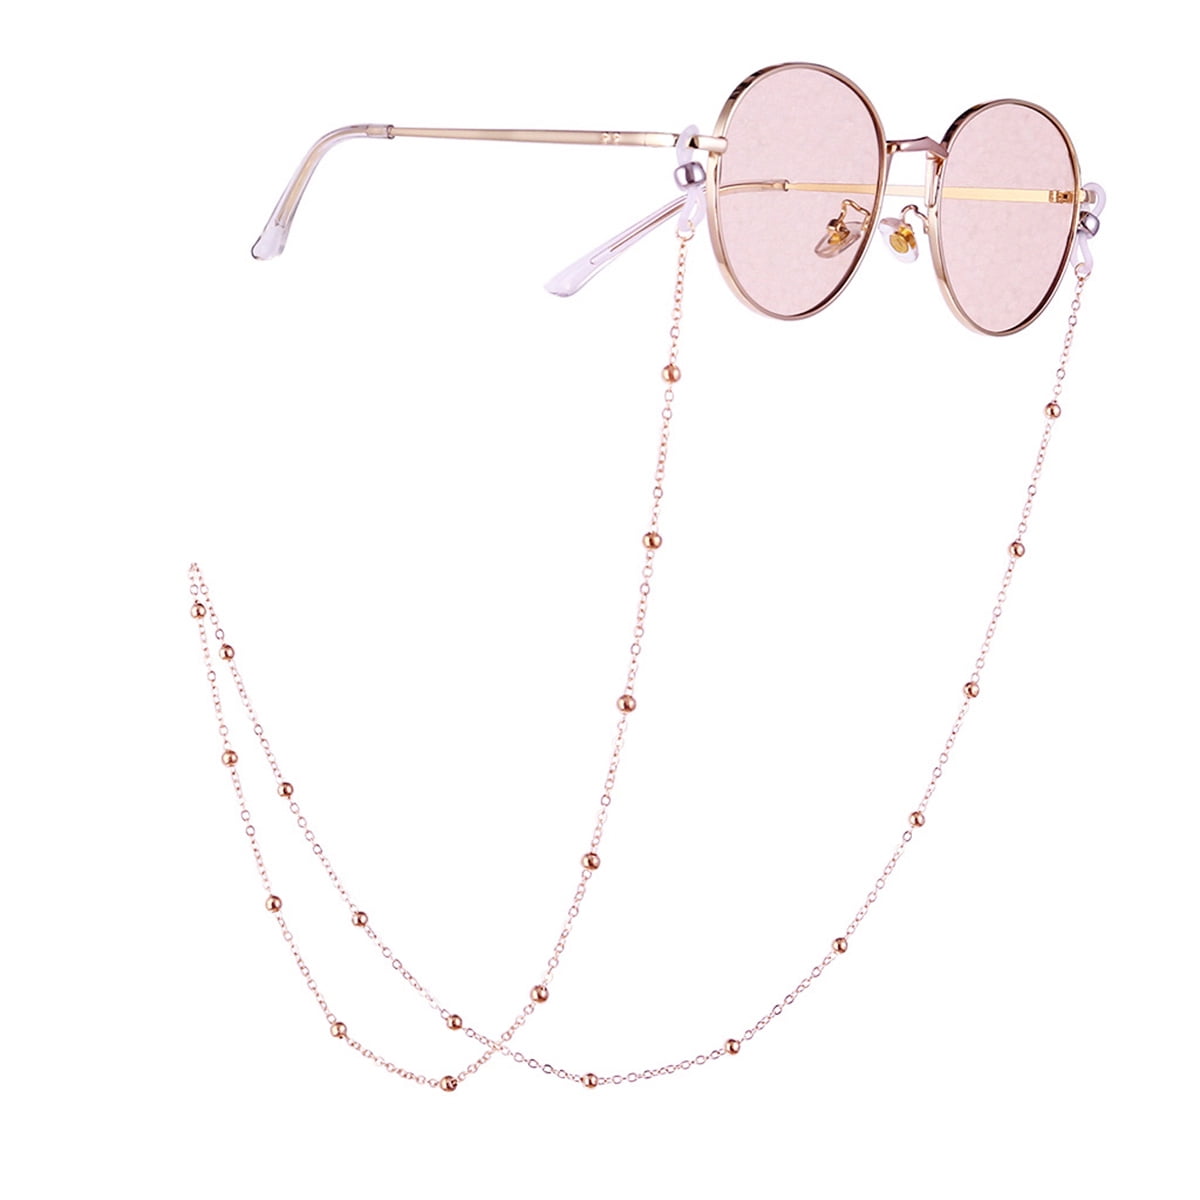 Multicolour Beaded Glasses Chain with Small Plush Ball Decorative Eyeglasses Chain Eyewear Retainer Spectacles Sunglasses Holder Glasses Cords Strap Rope